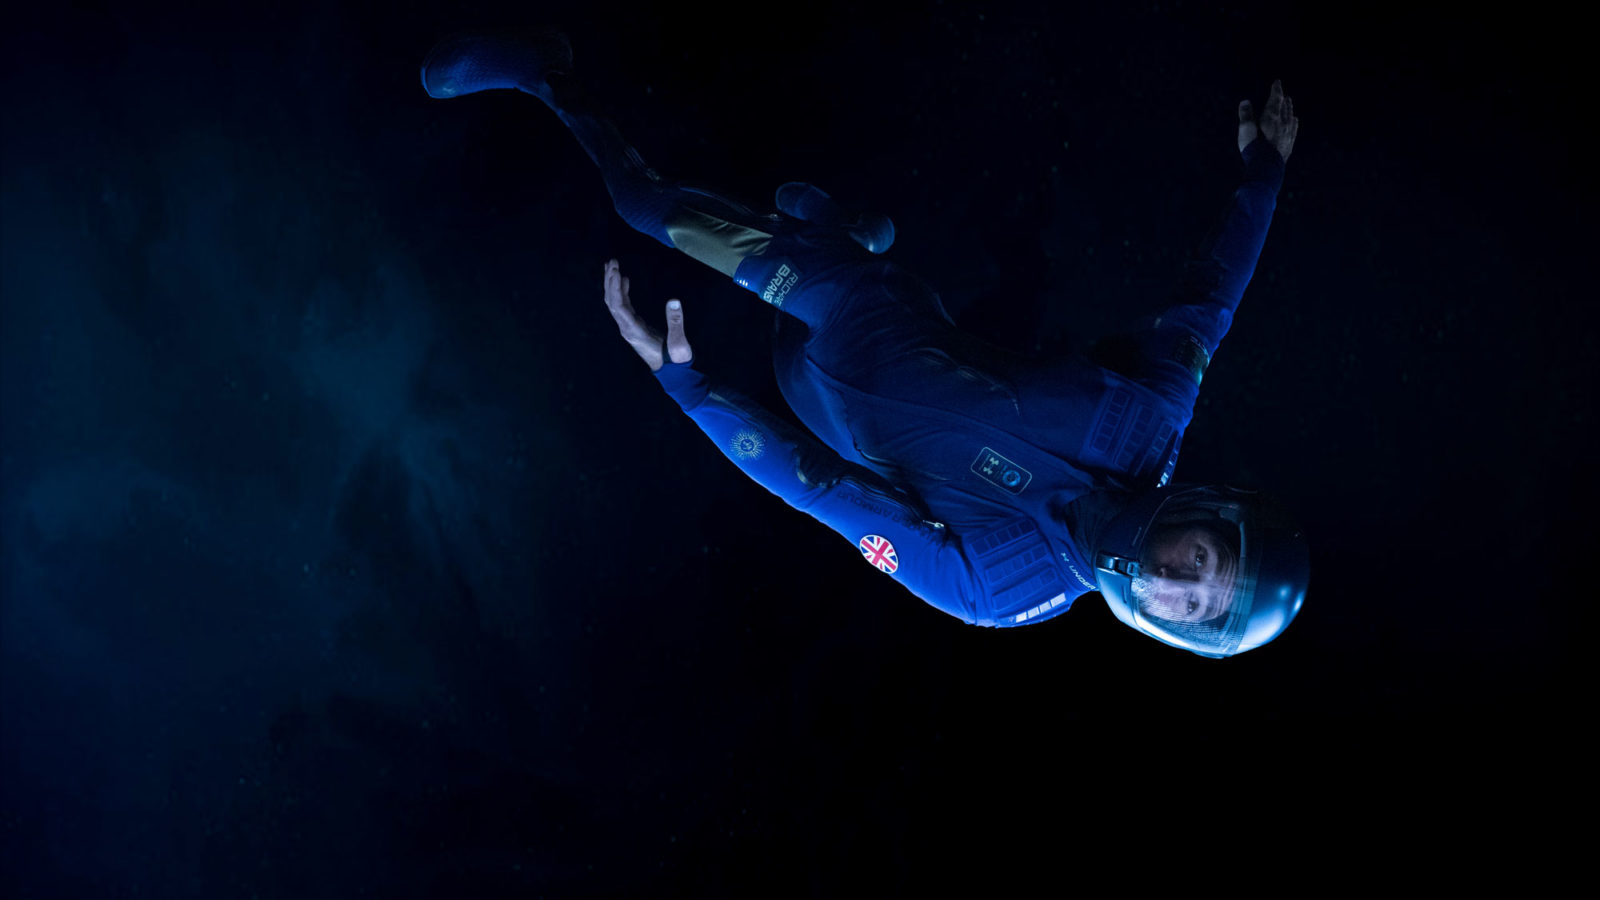 The unveil event in New York showcased the spacewear system on a zero gravity. © Virgin Galactic 